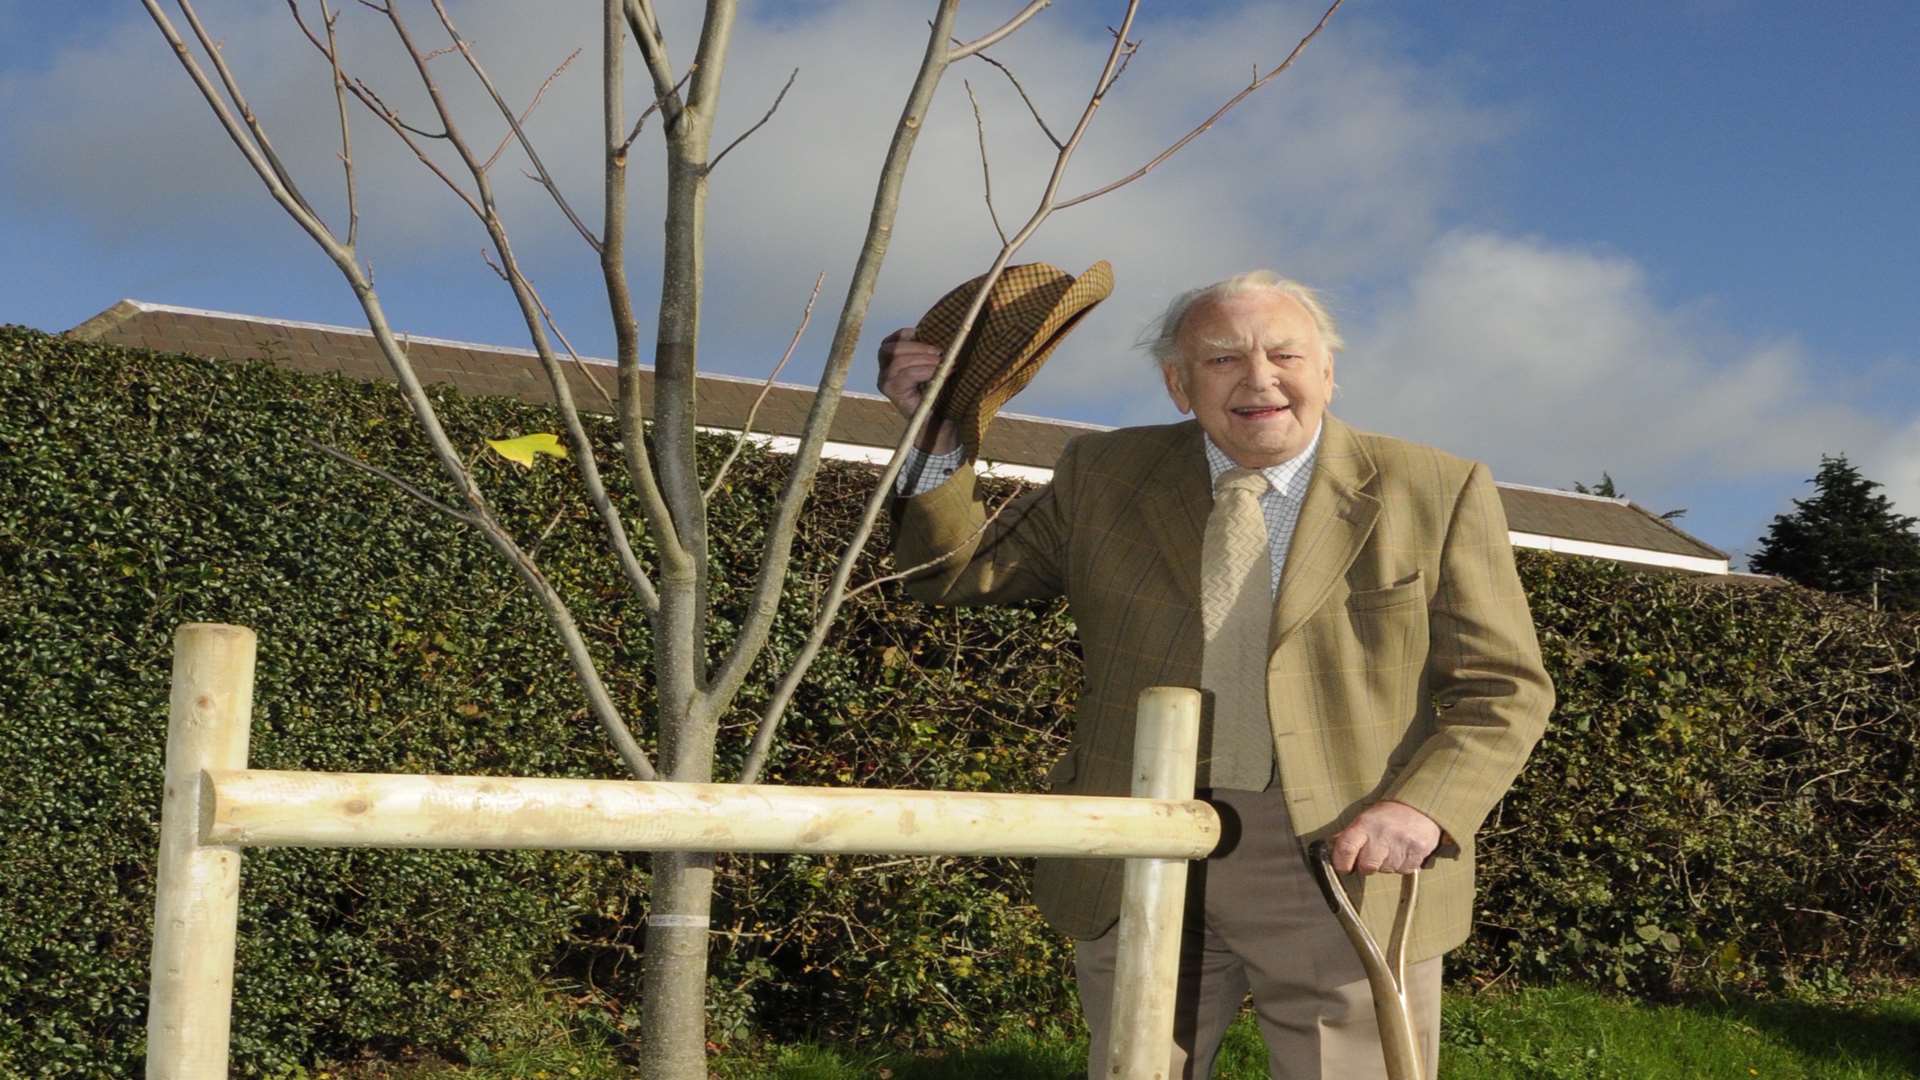 Sir Donald Sinden helped plant the tree Picture: Paul Amos